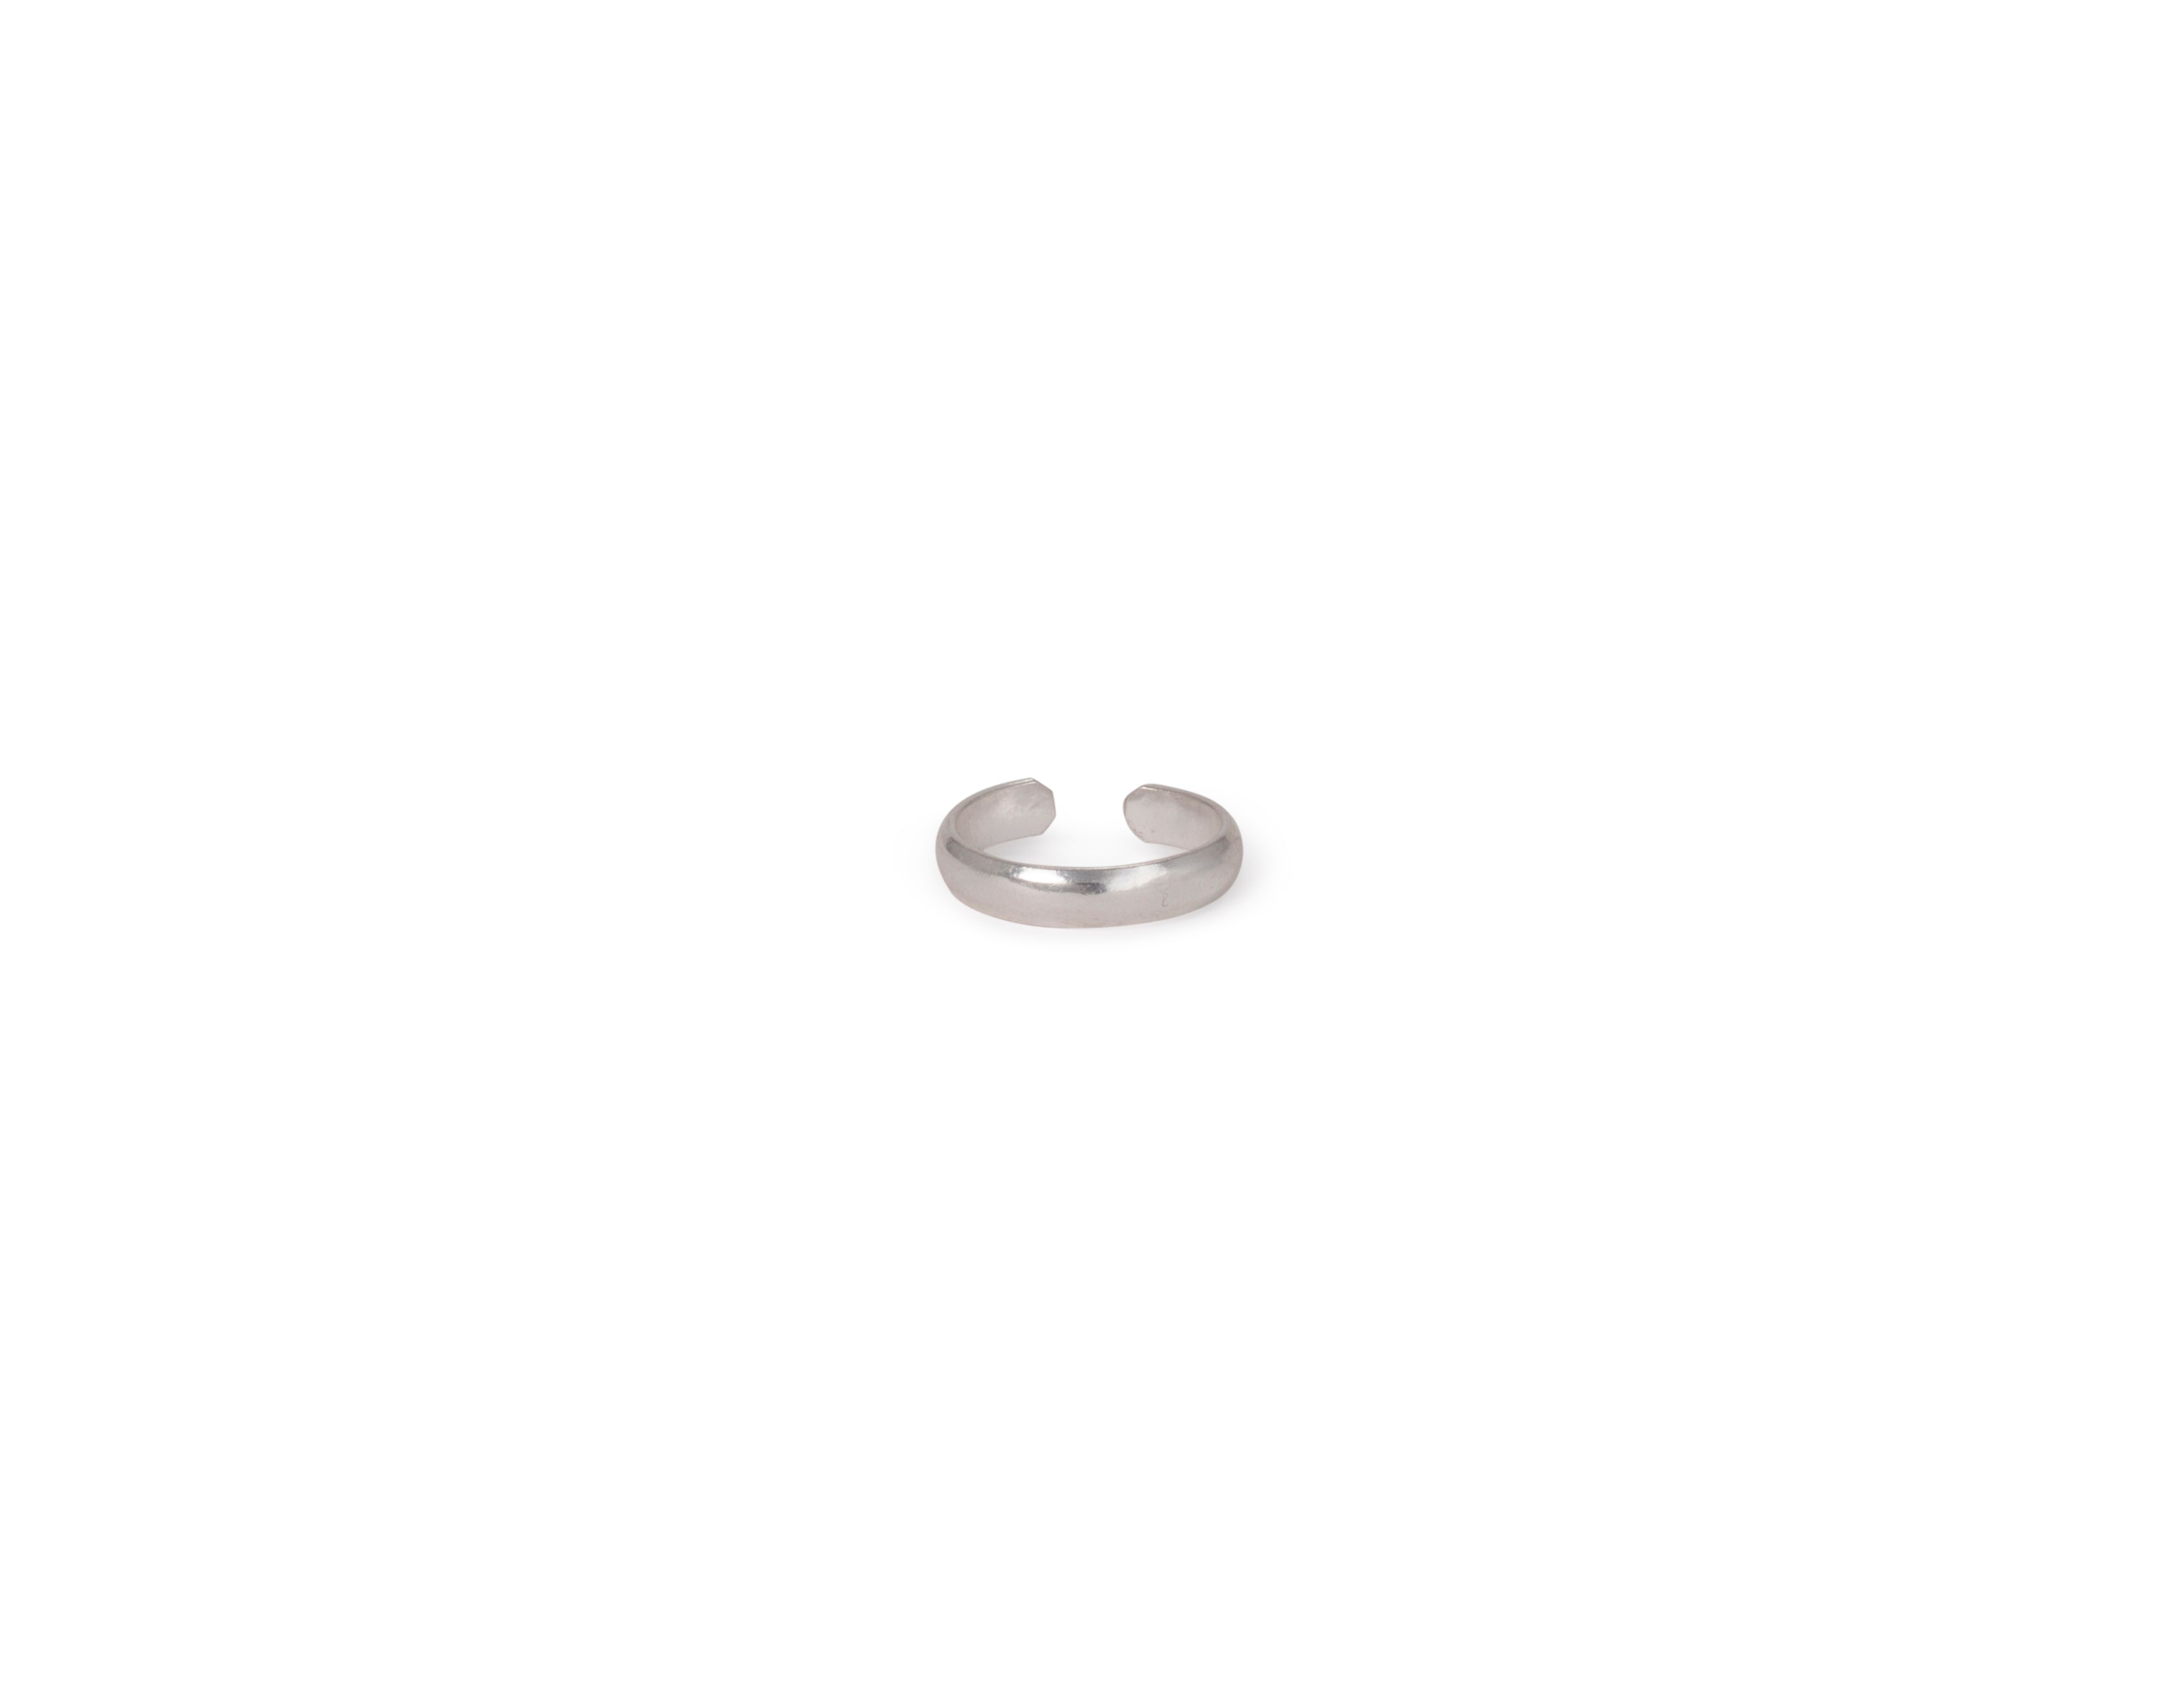 Sleek and simple rounded toe ring in silver